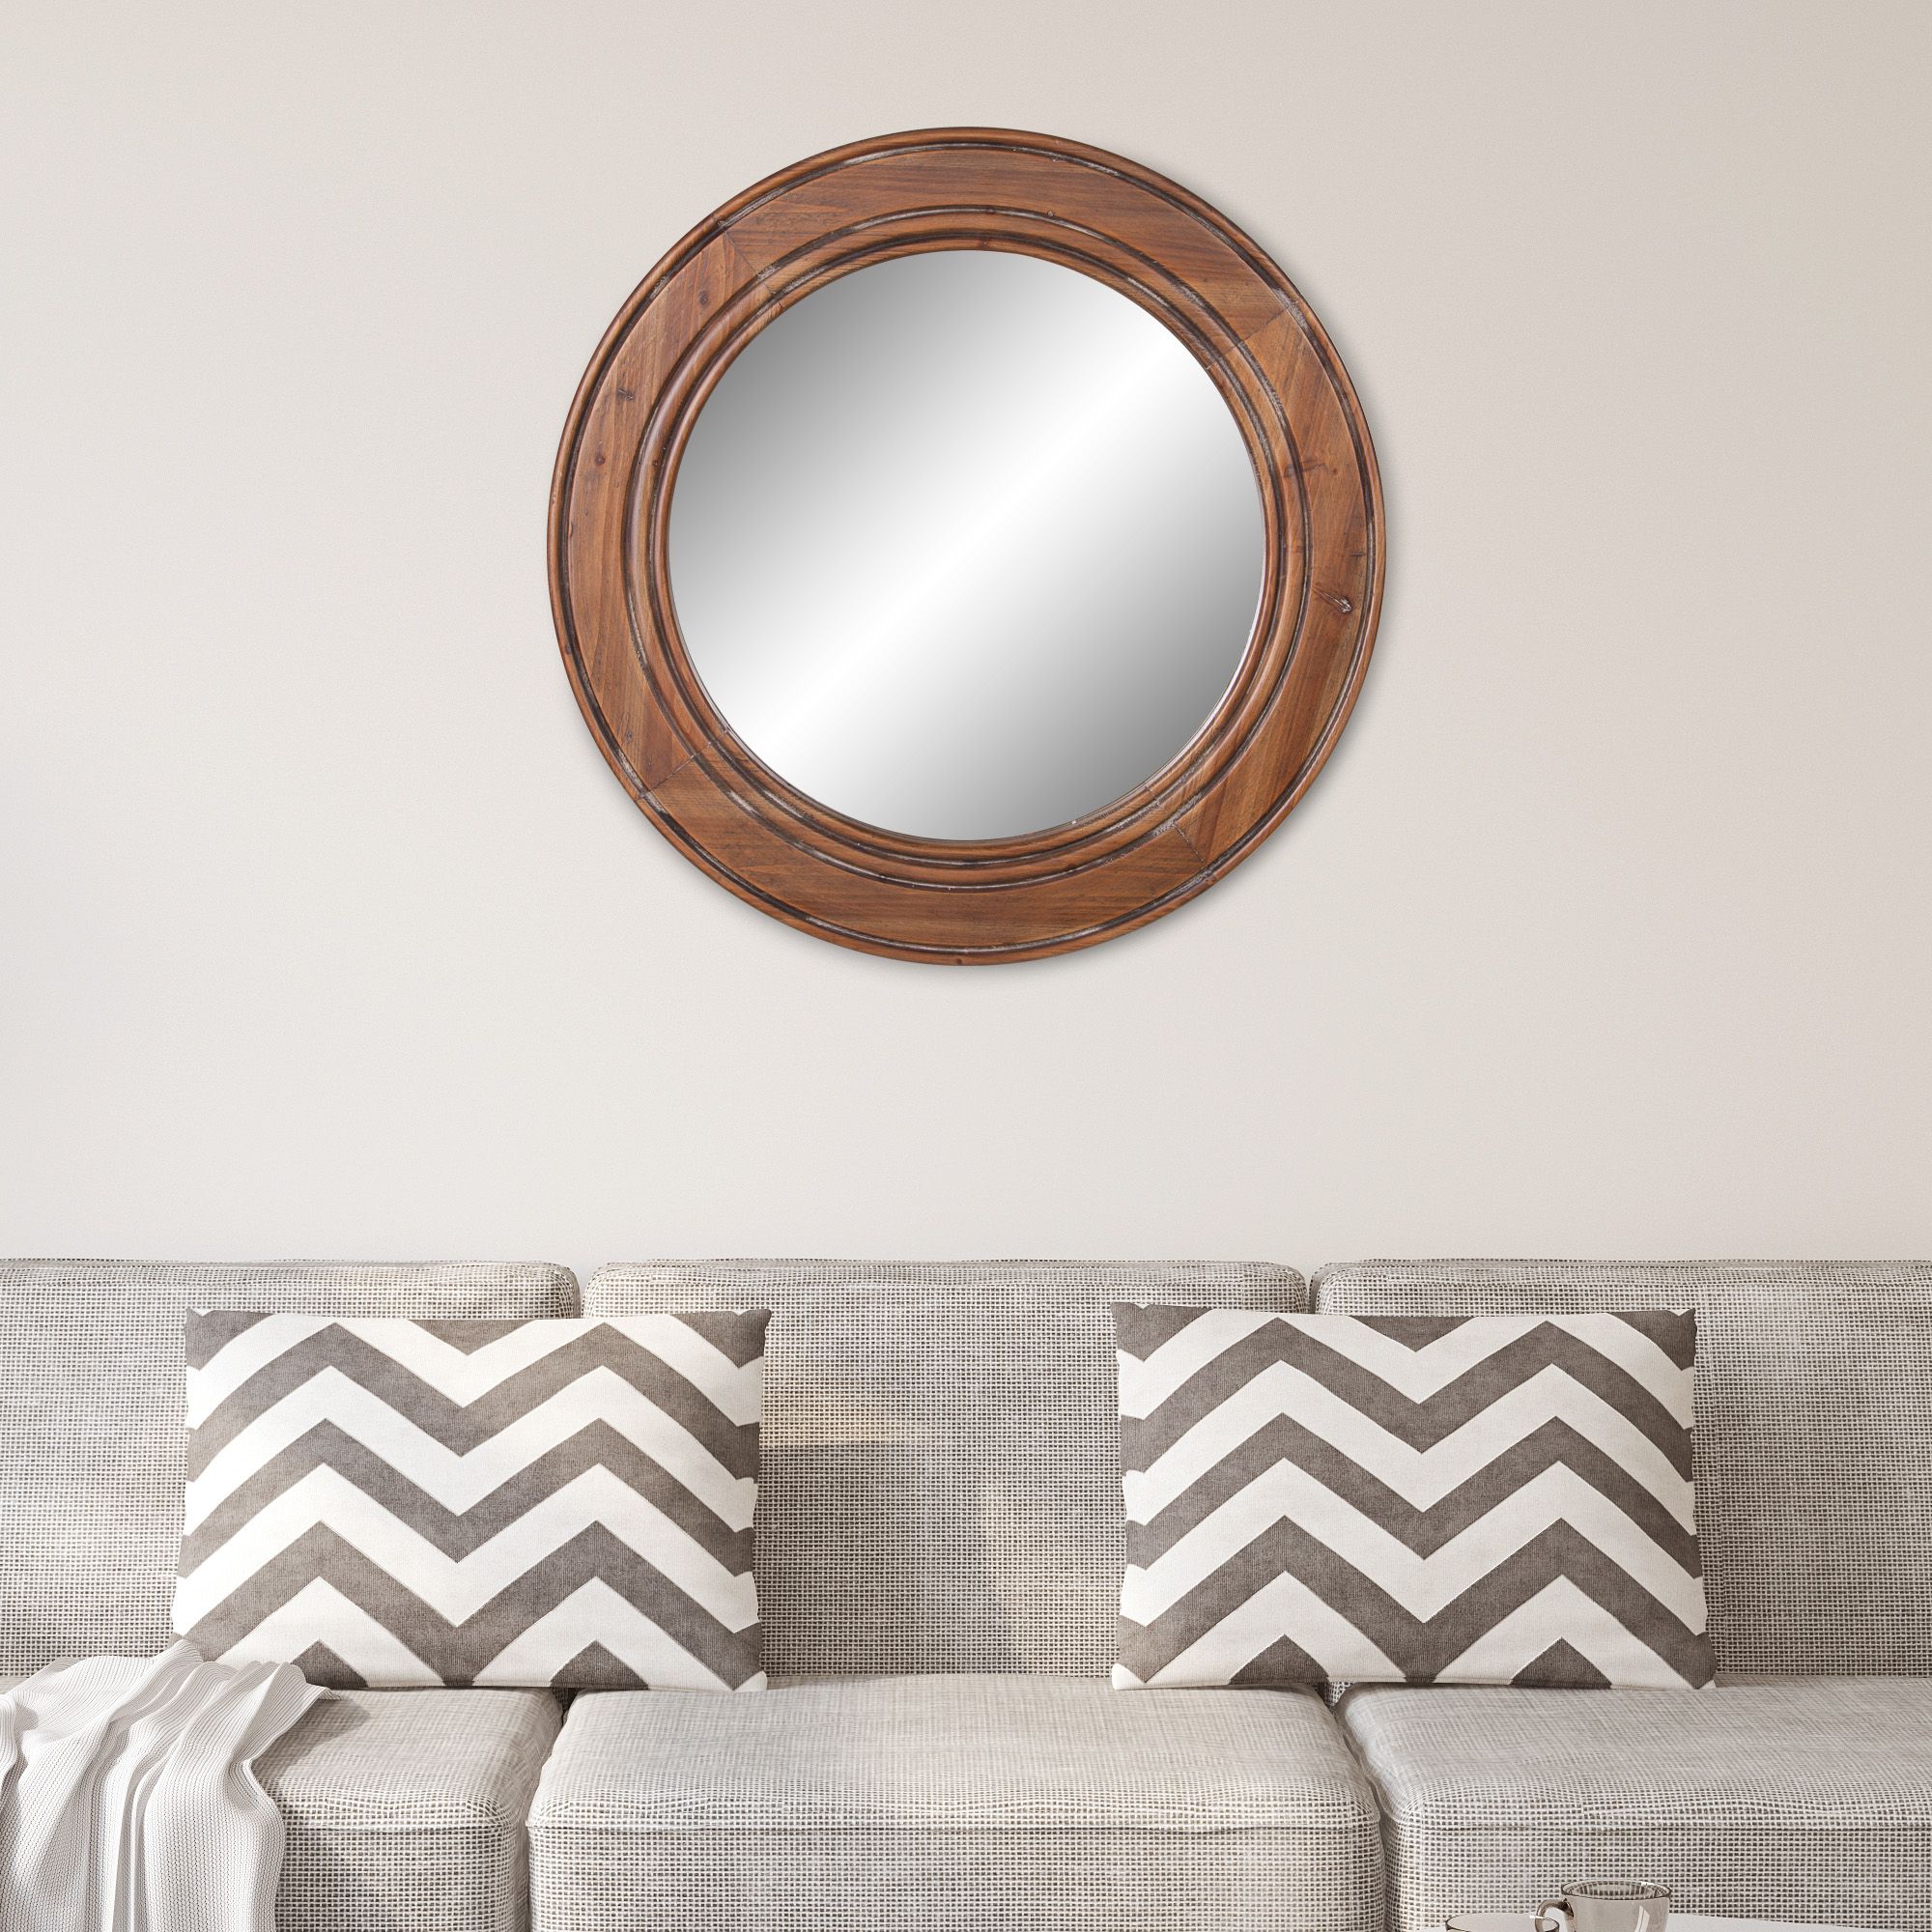 Reclaimed Wood Large Round Wall Accent Mirror 23"x23"patton Wall With Wood Rounded Side Rectangular Wall Mirrors (View 3 of 15)